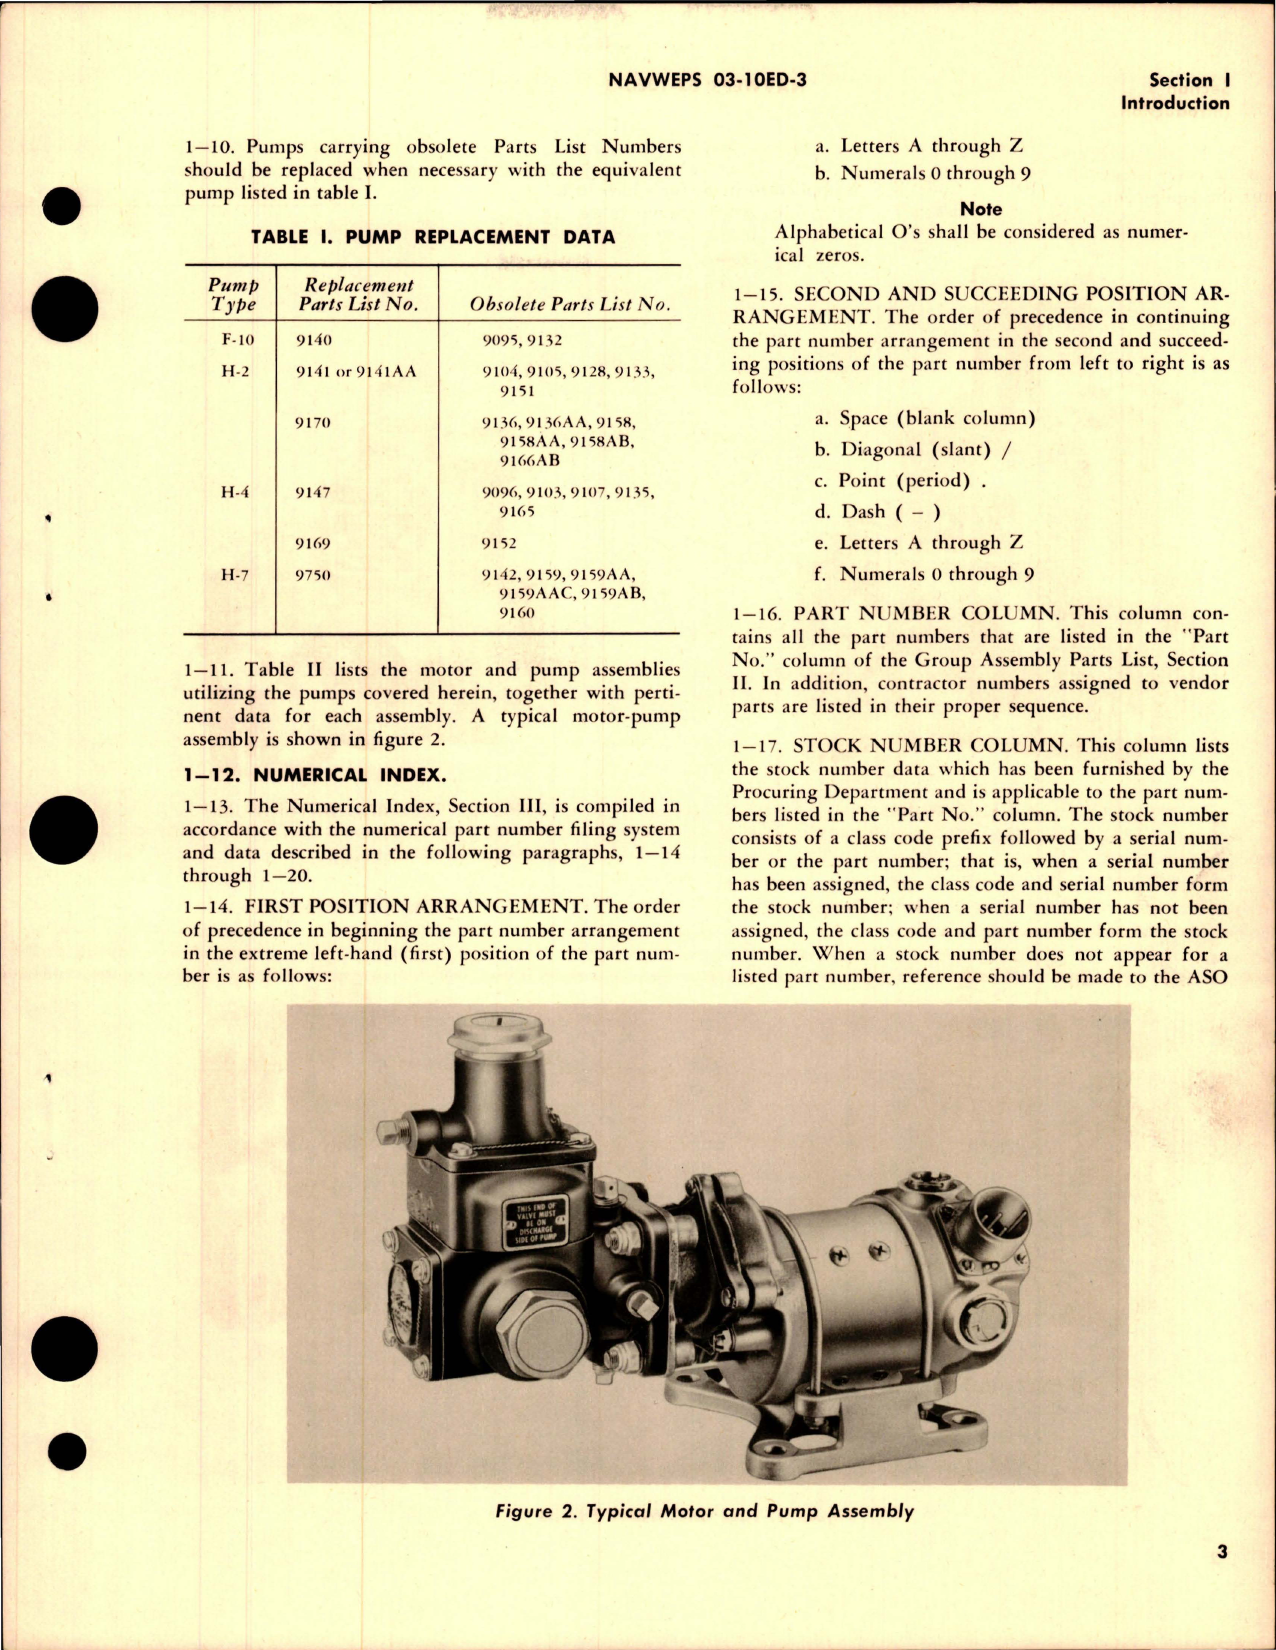 Sample page 5 from AirCorps Library document: Illustrated Parts Breakdown for Fuel and Water Pumps - Types F-10, H-2, H-4 and H-7 